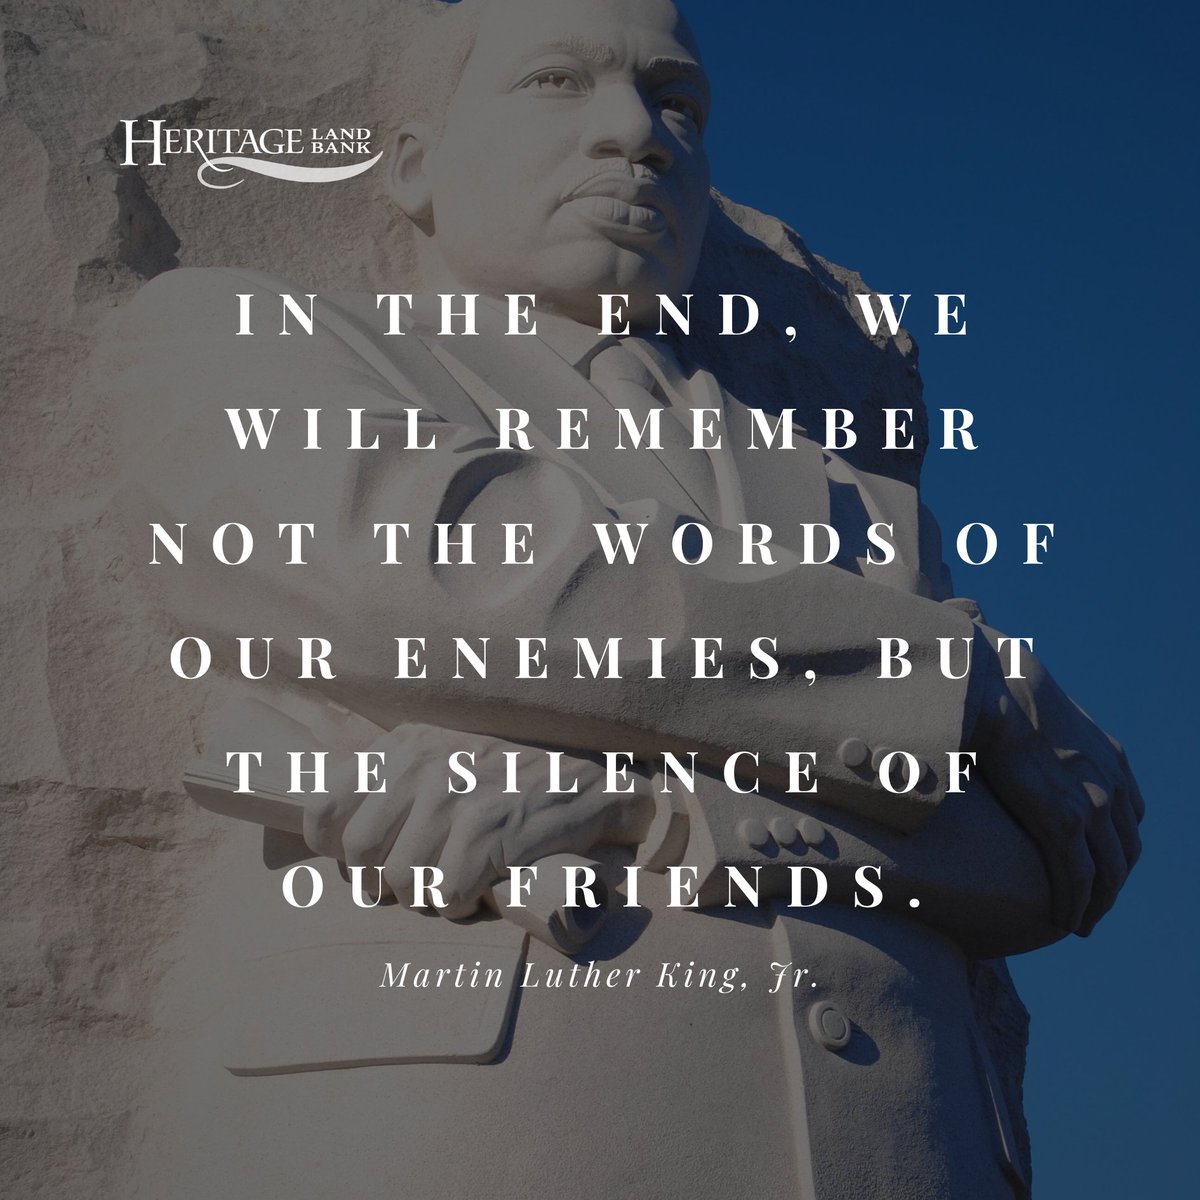 On this MLK Jr. Day, Heritage Land Bank celebrates his enduring spirit of justice, equality, and community. Let's reflect on Dr. King's vision and continue cultivating a future rooted in unity. 🇺🇸 #MLKDay